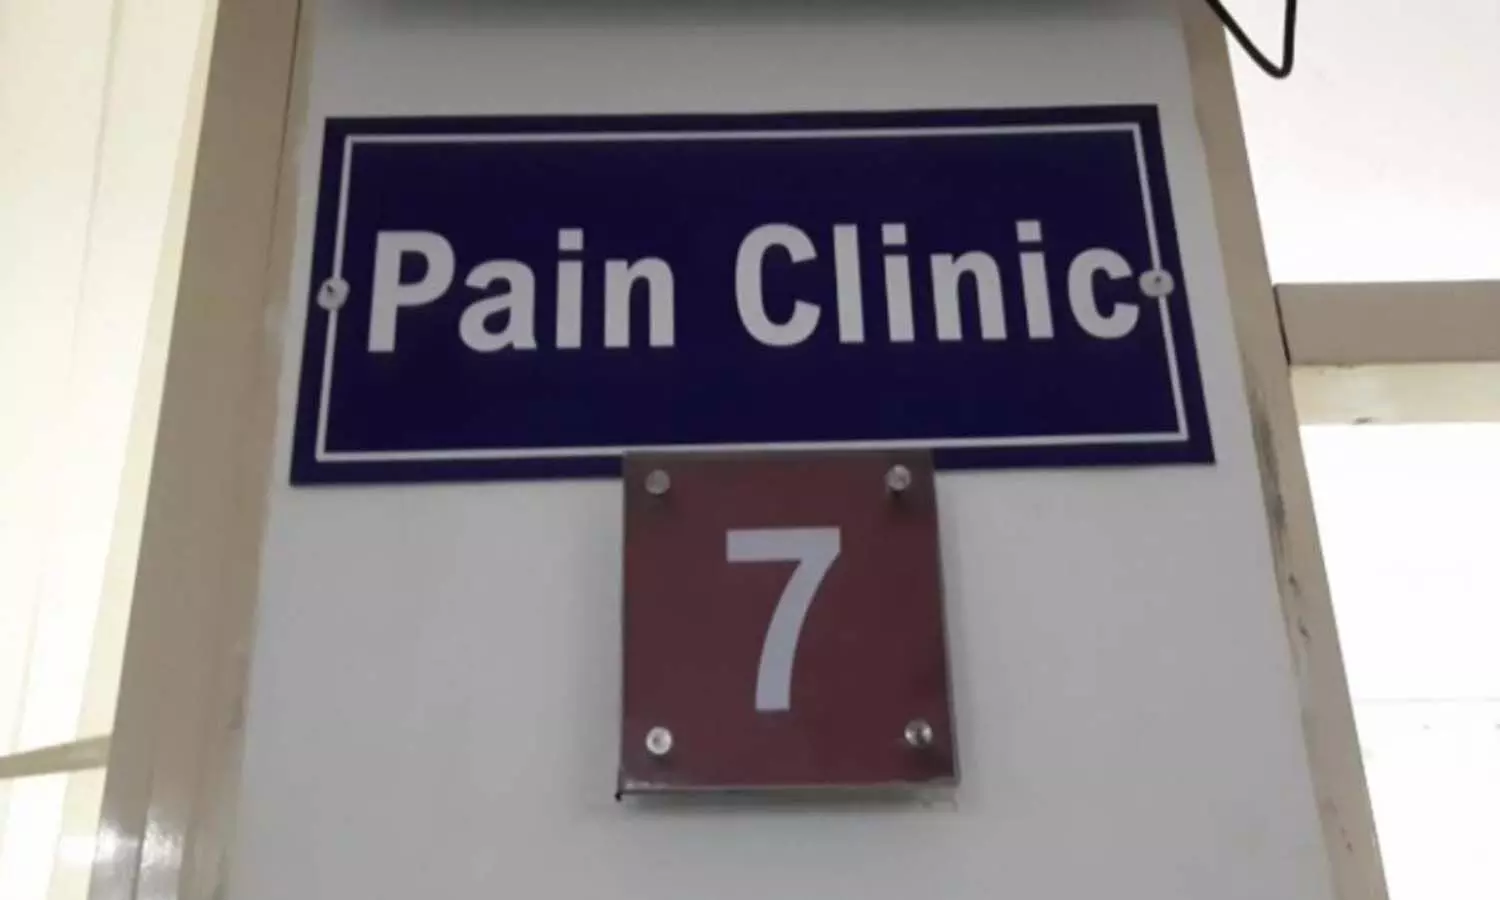 There is a cure for every pain in this Pain Clinic of Prayagraj, read this special report